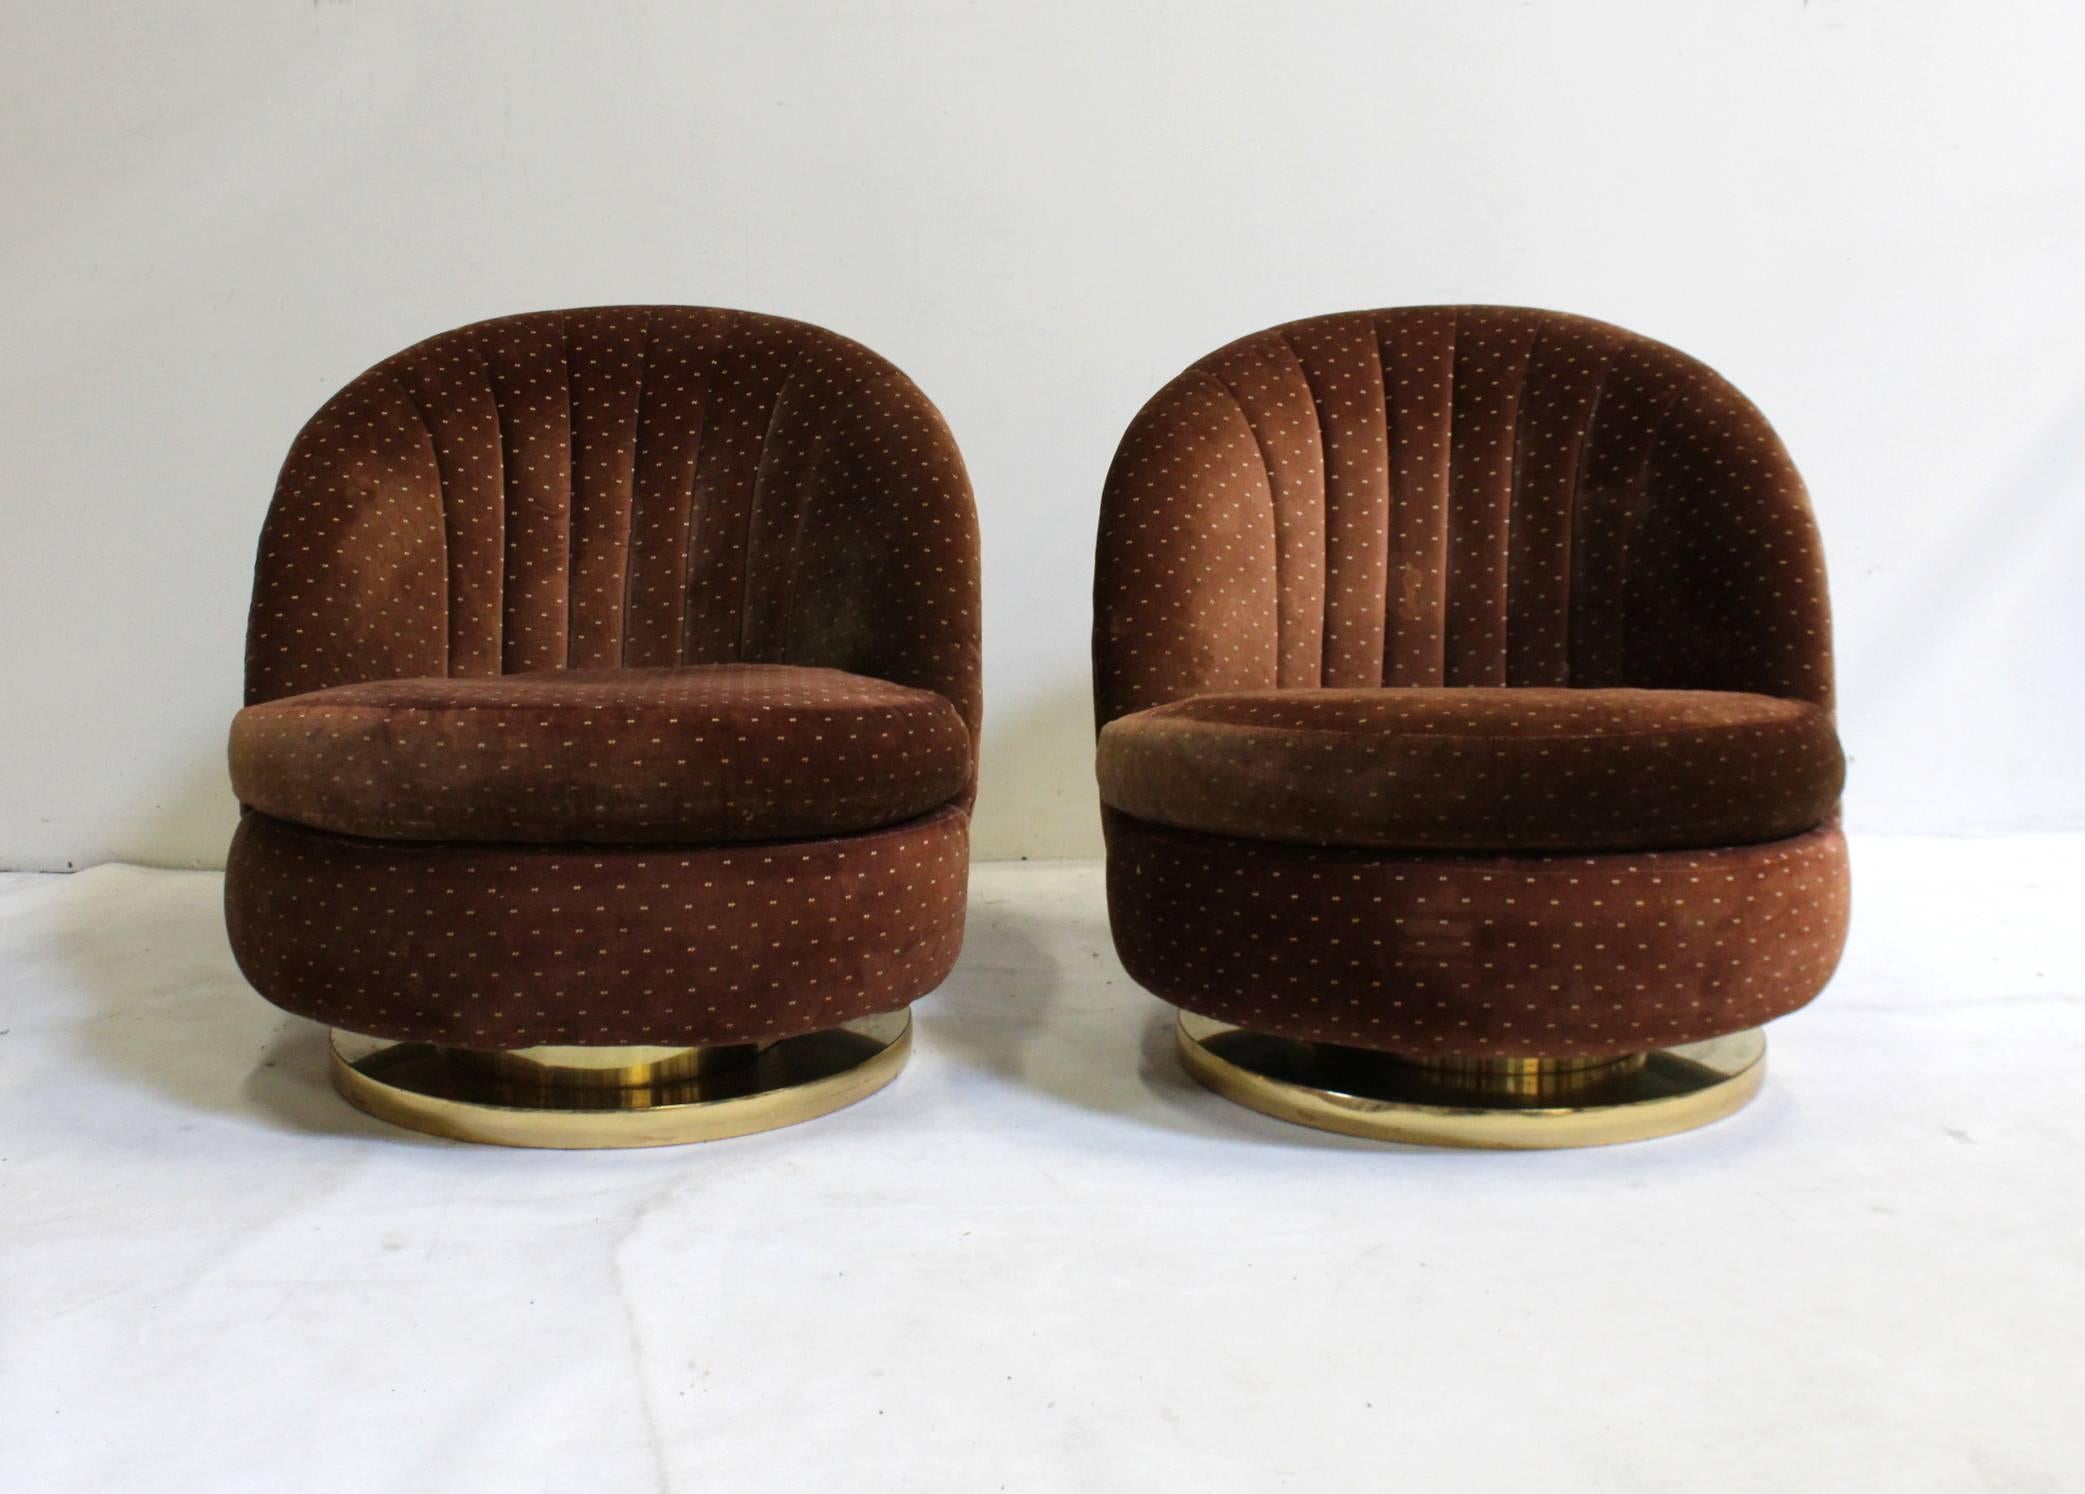 Pair of Milo Baughman for Thayer Coggin swivel and rock lounge chairs from the 1970s with original tag and upholstery. Upholstery is worn and damaged and needs to be re-upholstered. Base shows signs of wear but presents well.